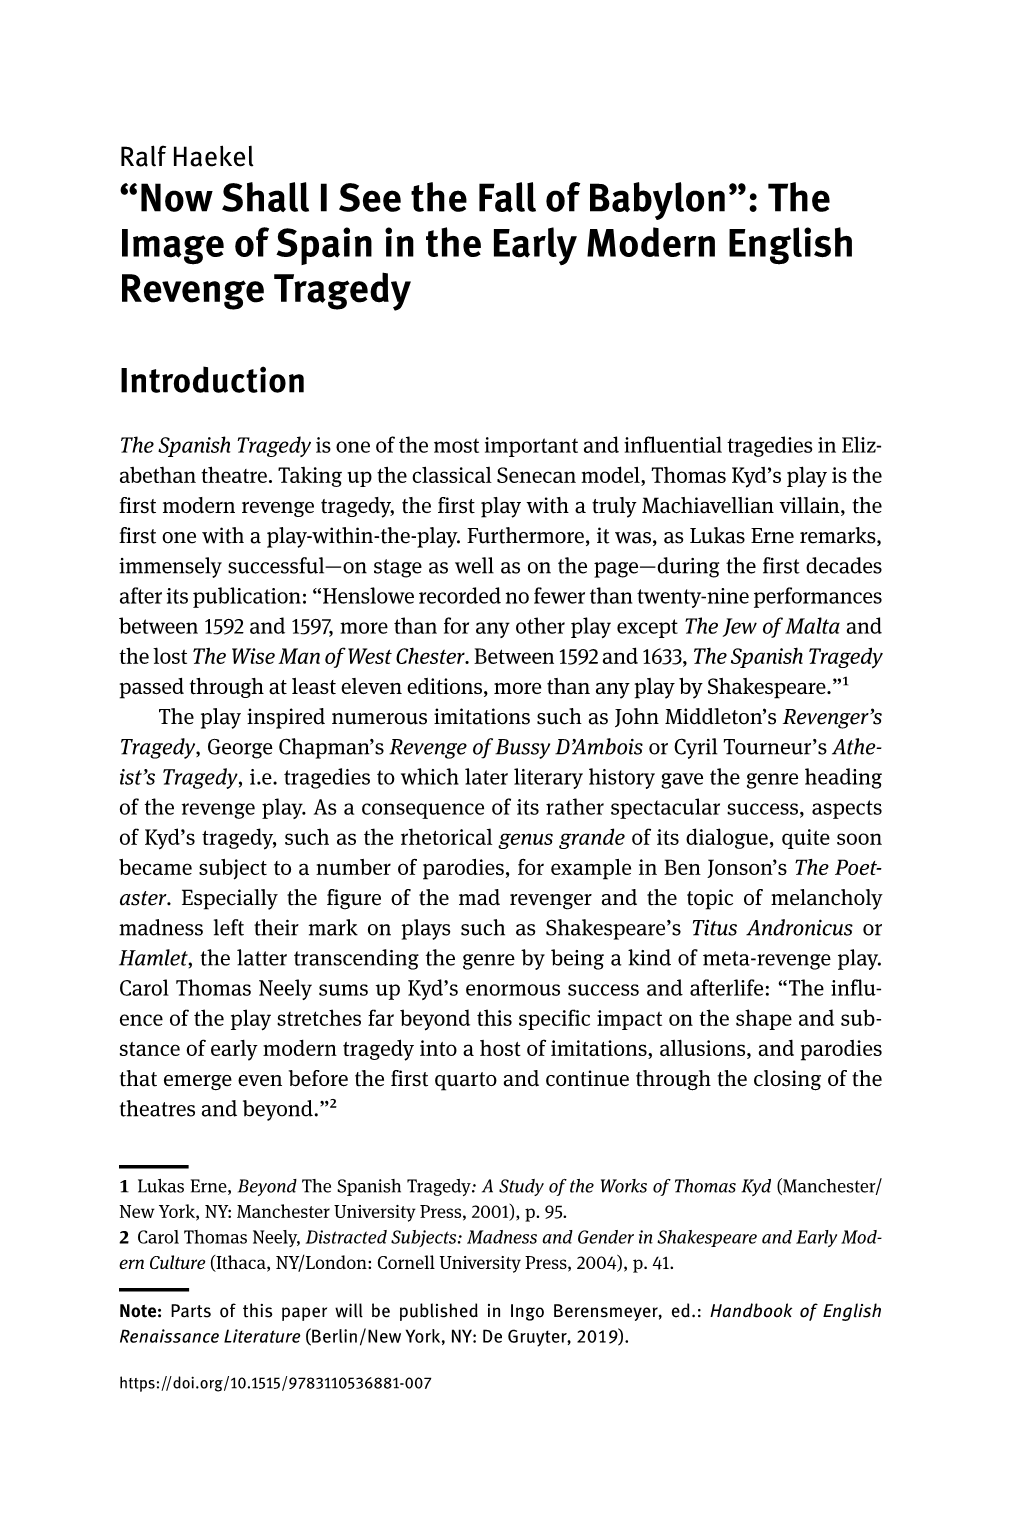 The Image of Spain in the Early Modern English Revenge Tragedy